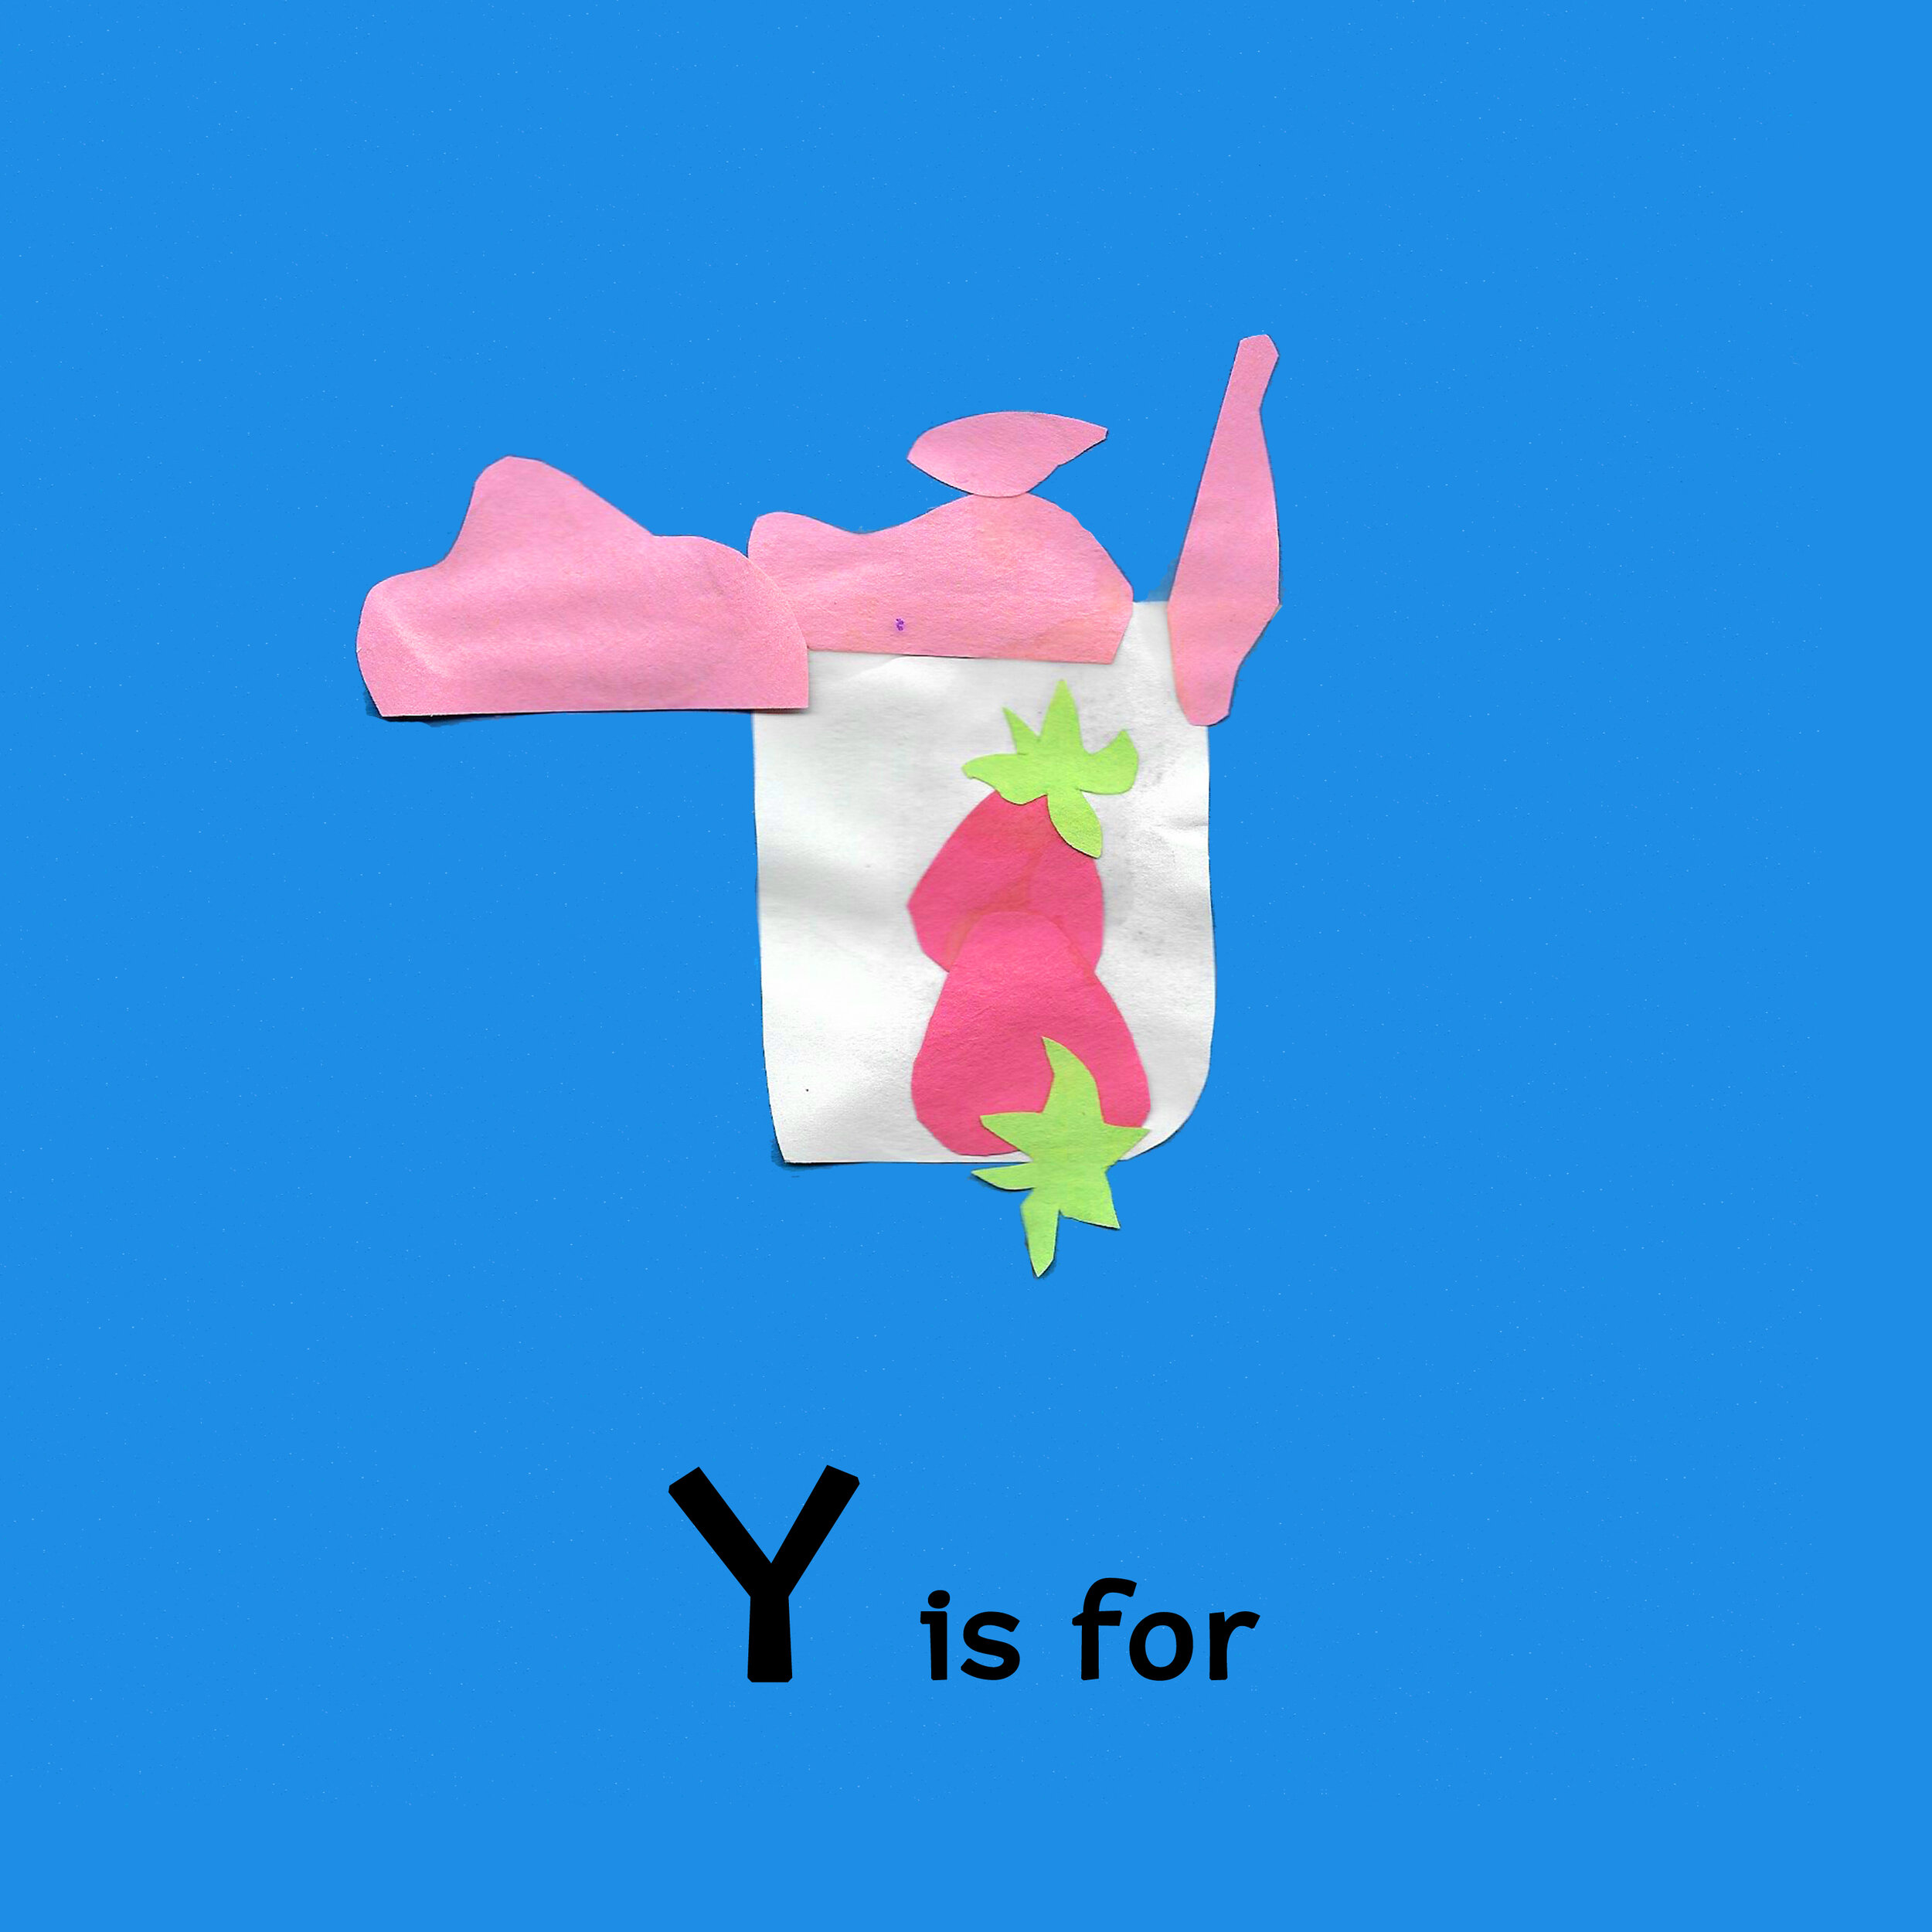 Y is for.jpg